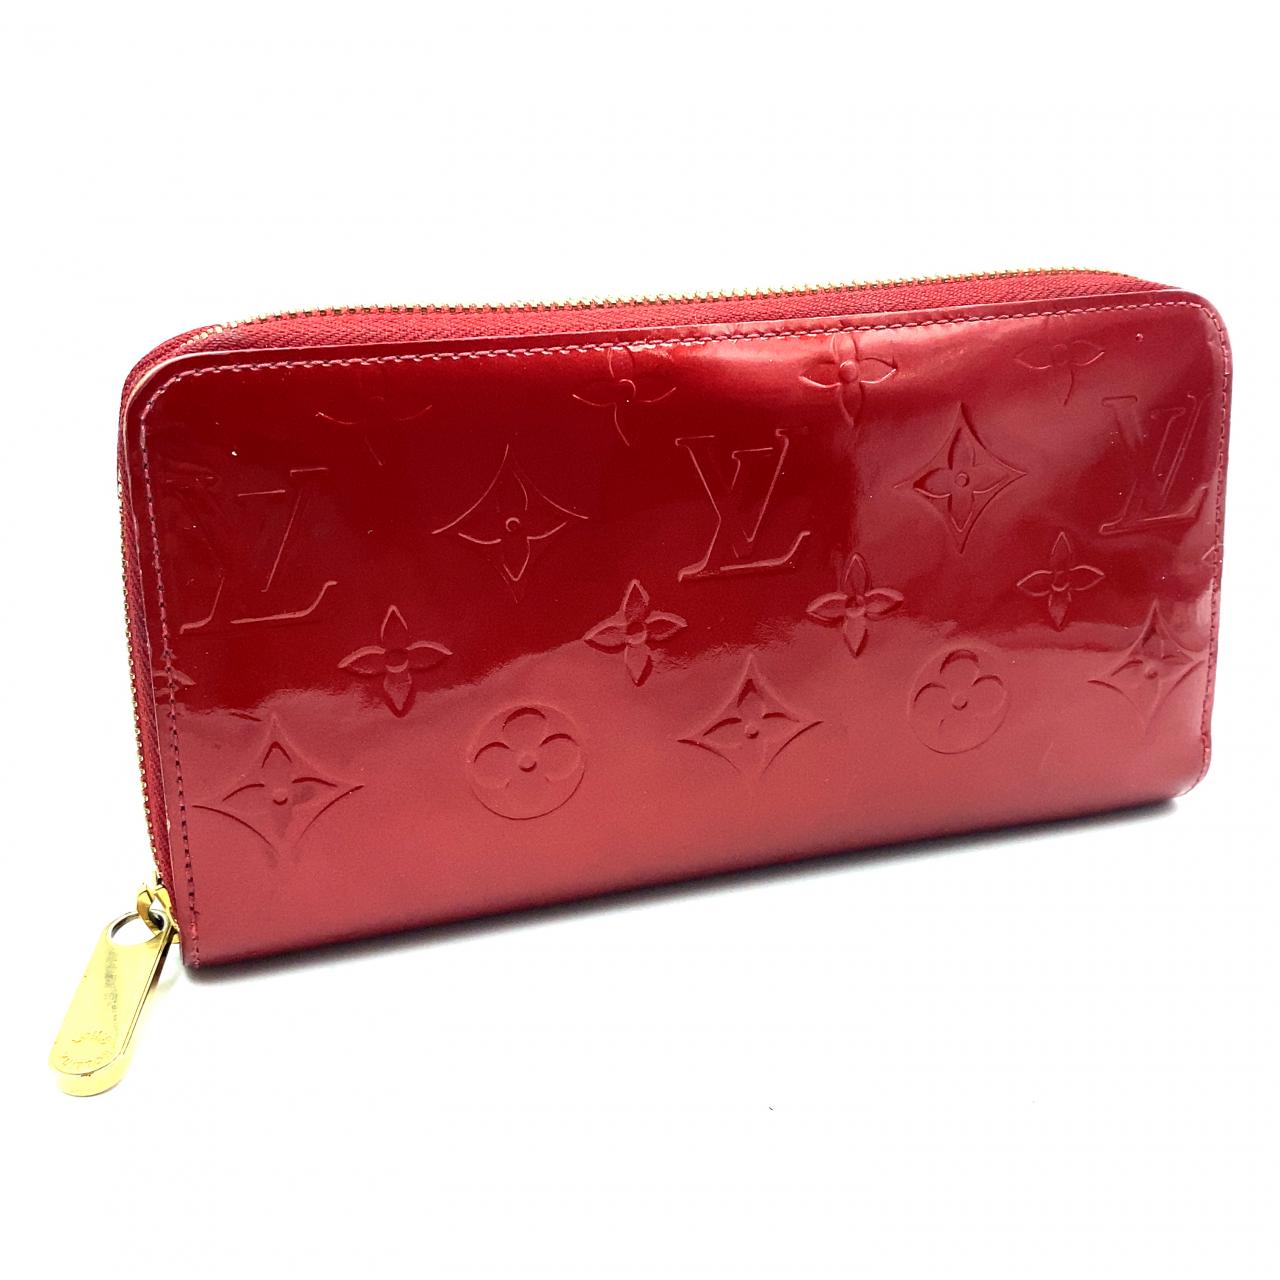 Pre-Owned Louis Vuitton 2011 Monogram Vernis Red Patent Leather Zippy Wallet